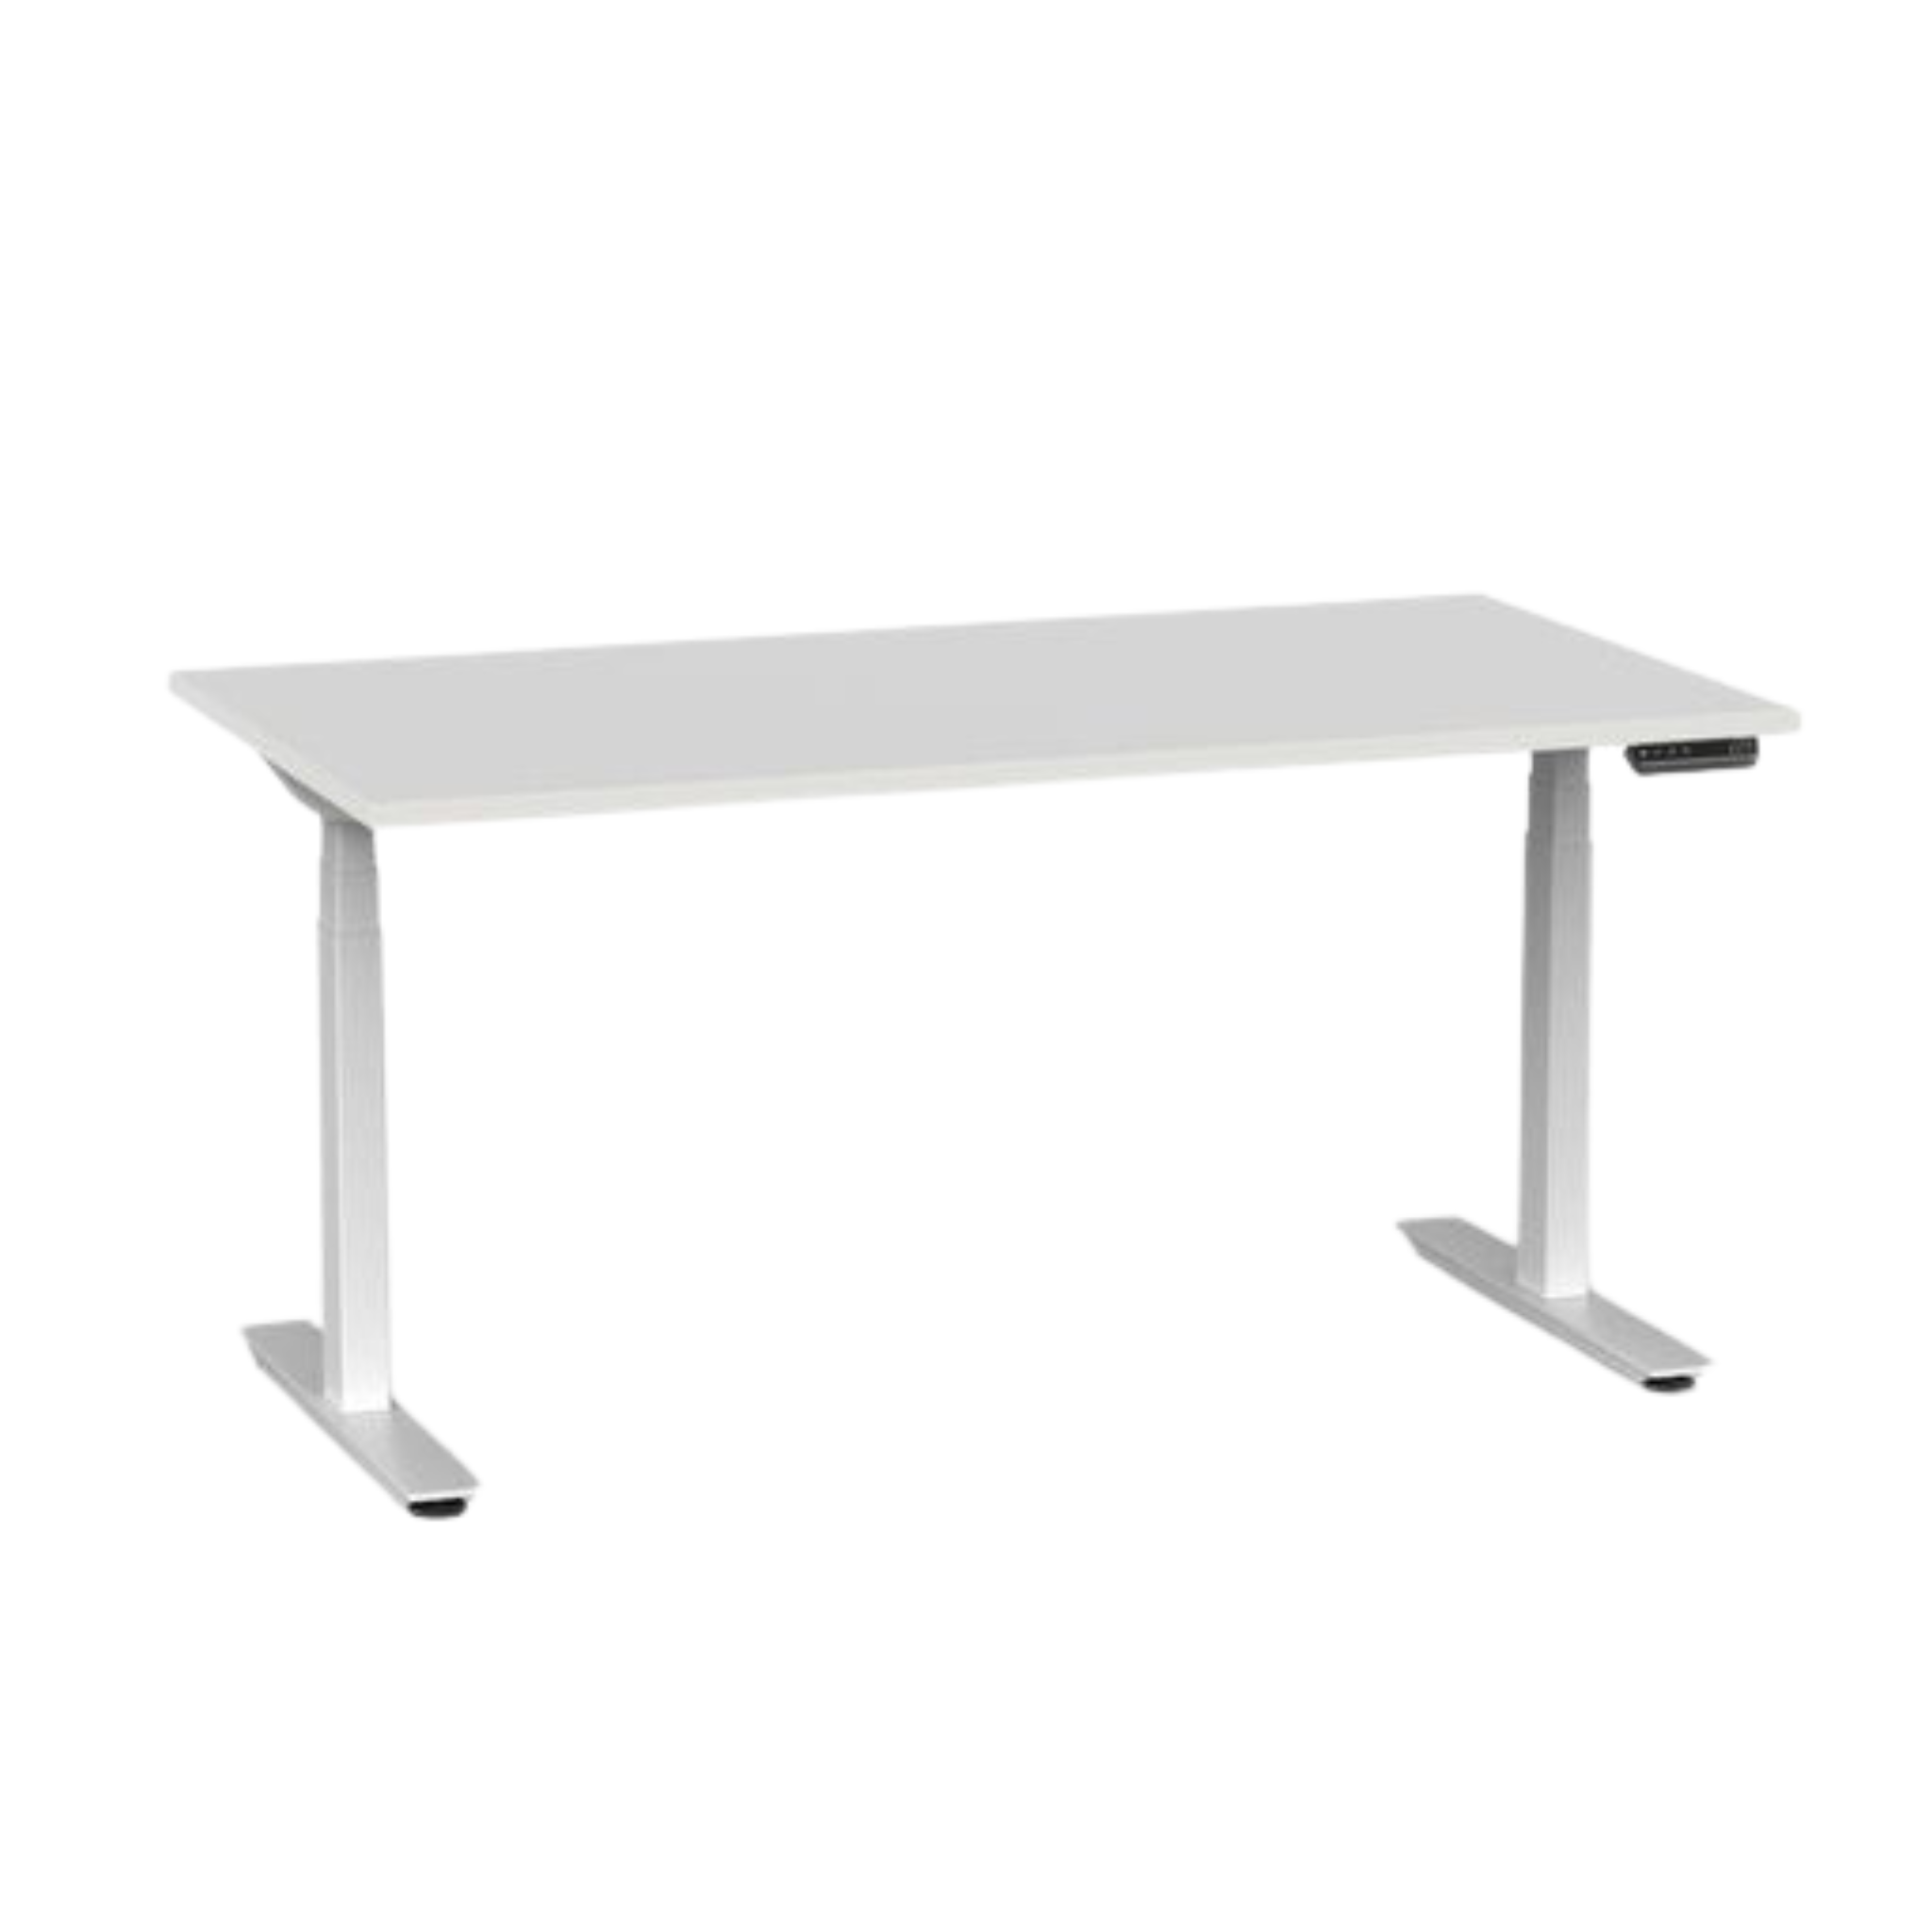 Agile Pro electric sit to stand desk with white frame and white top